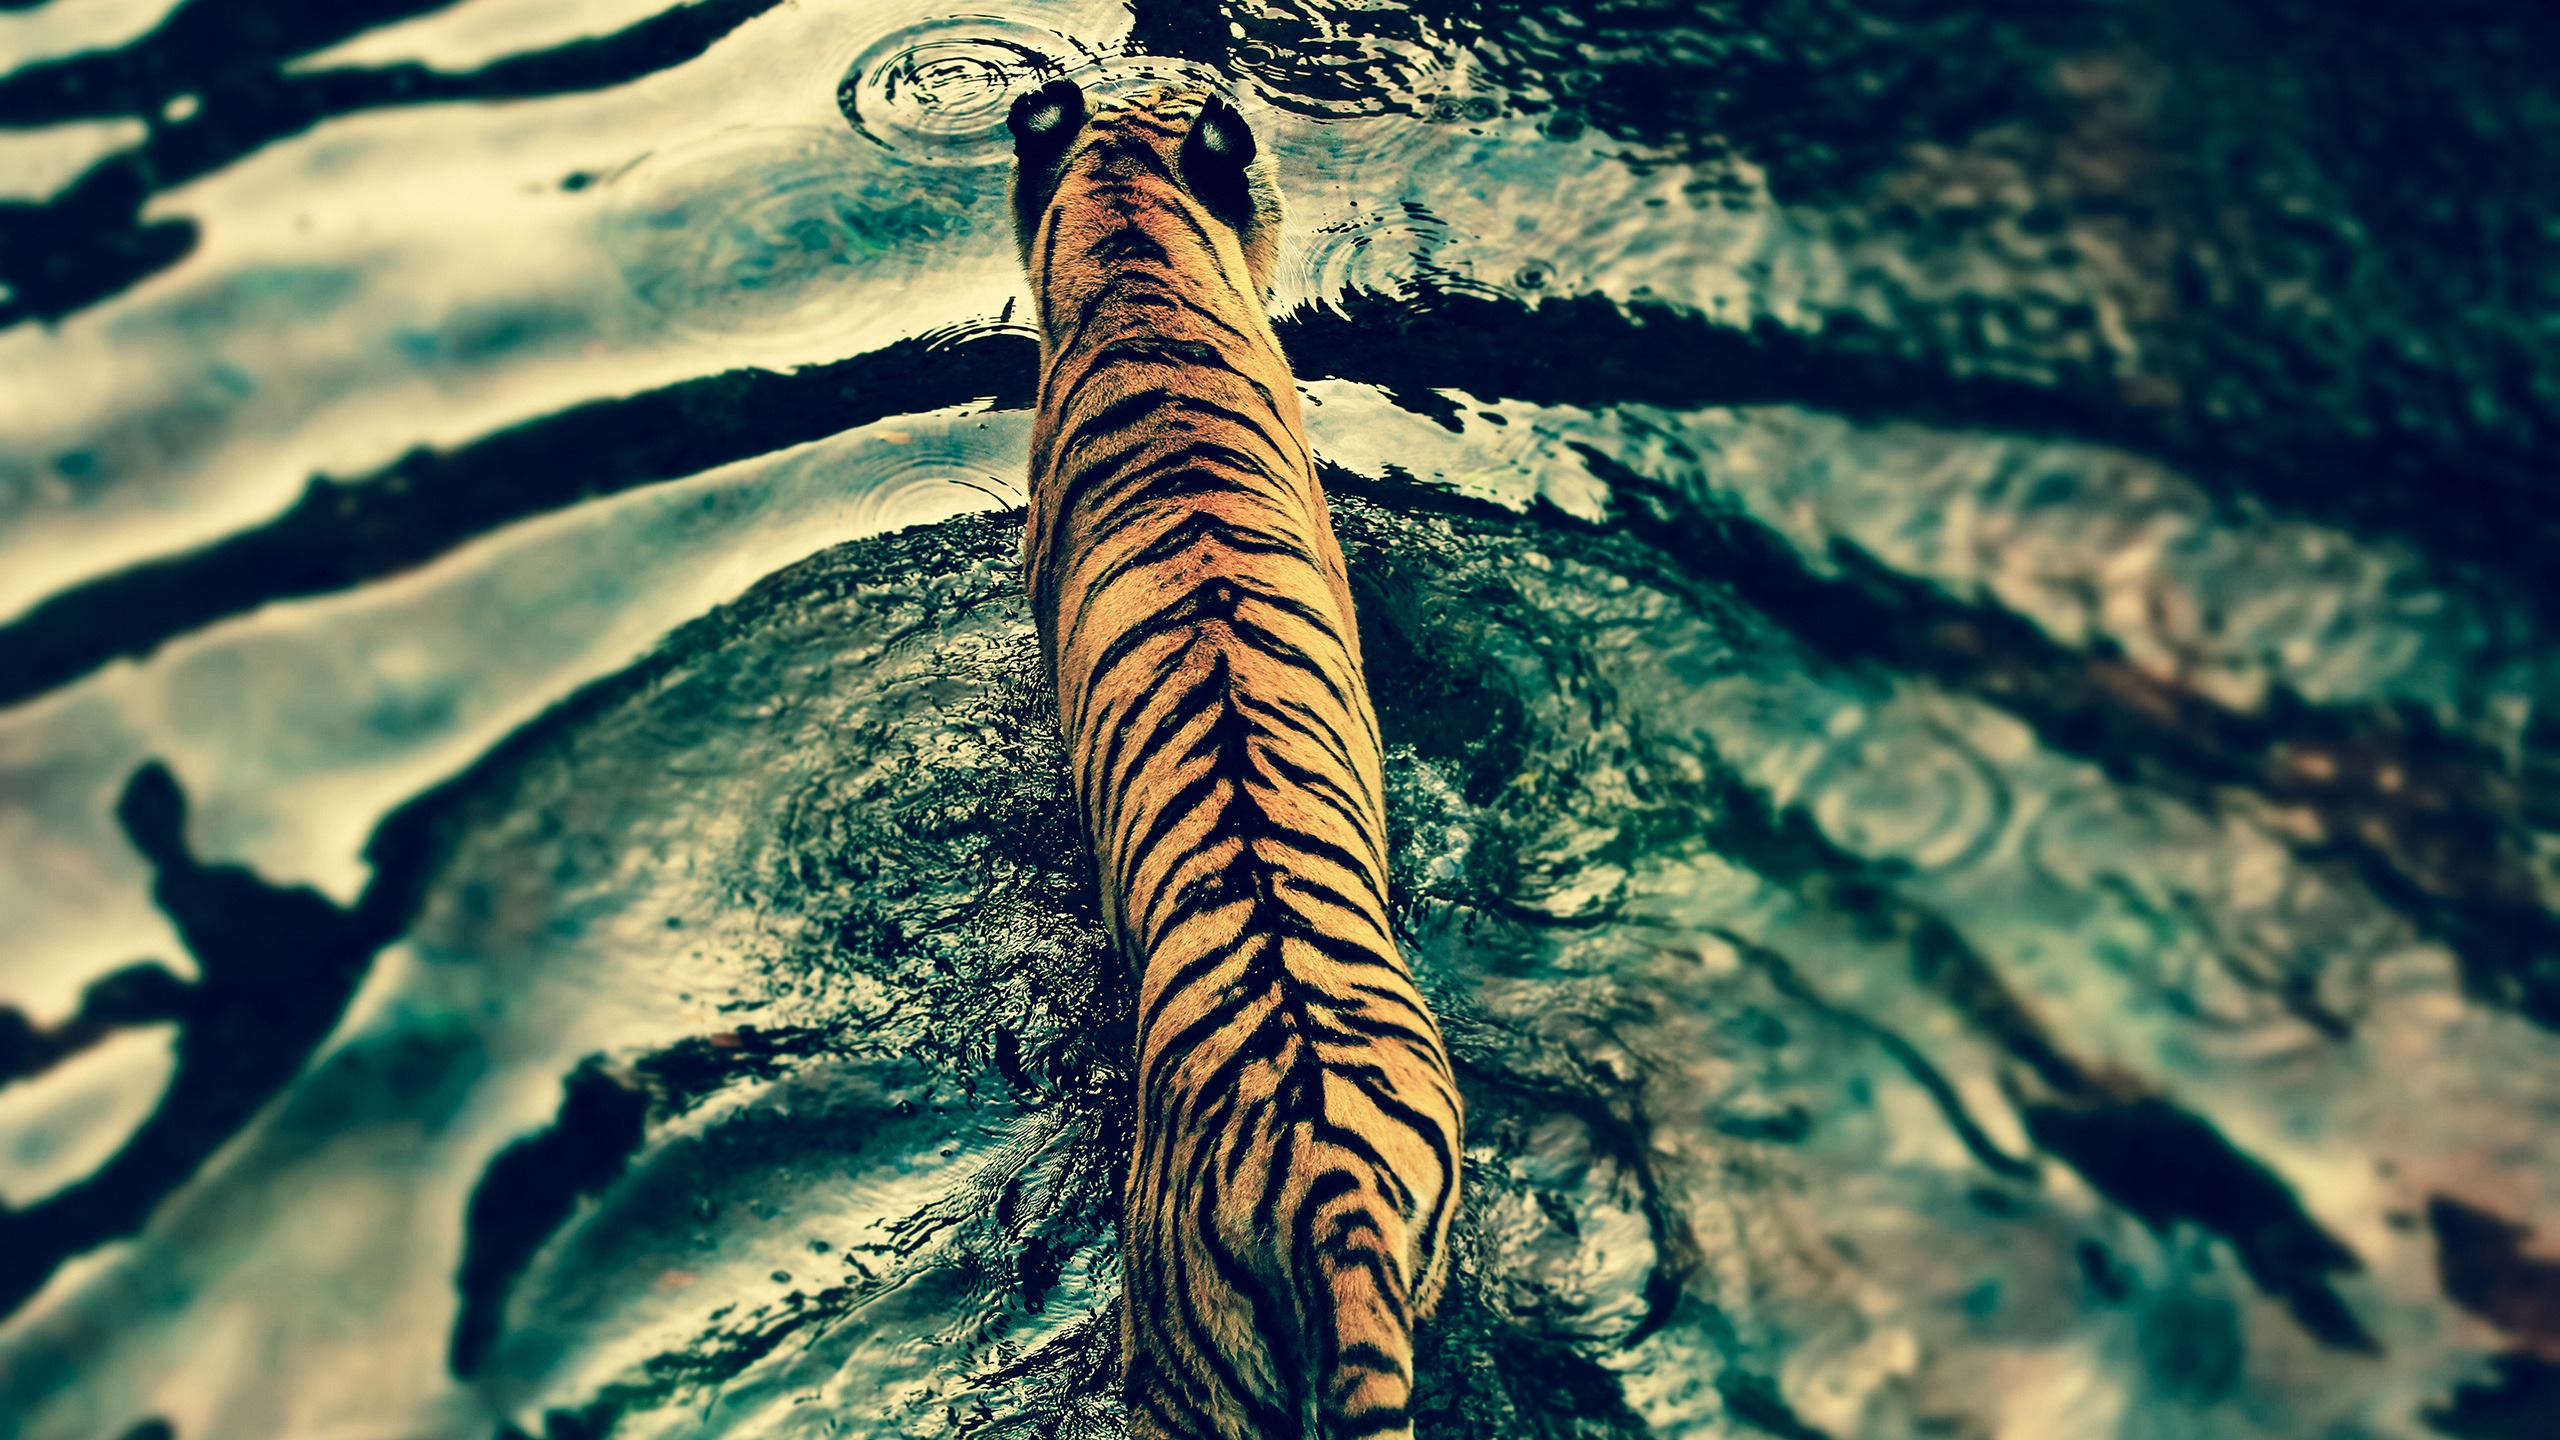 Beautiful Tiger in Water for 2560x1440 HDTV resolution